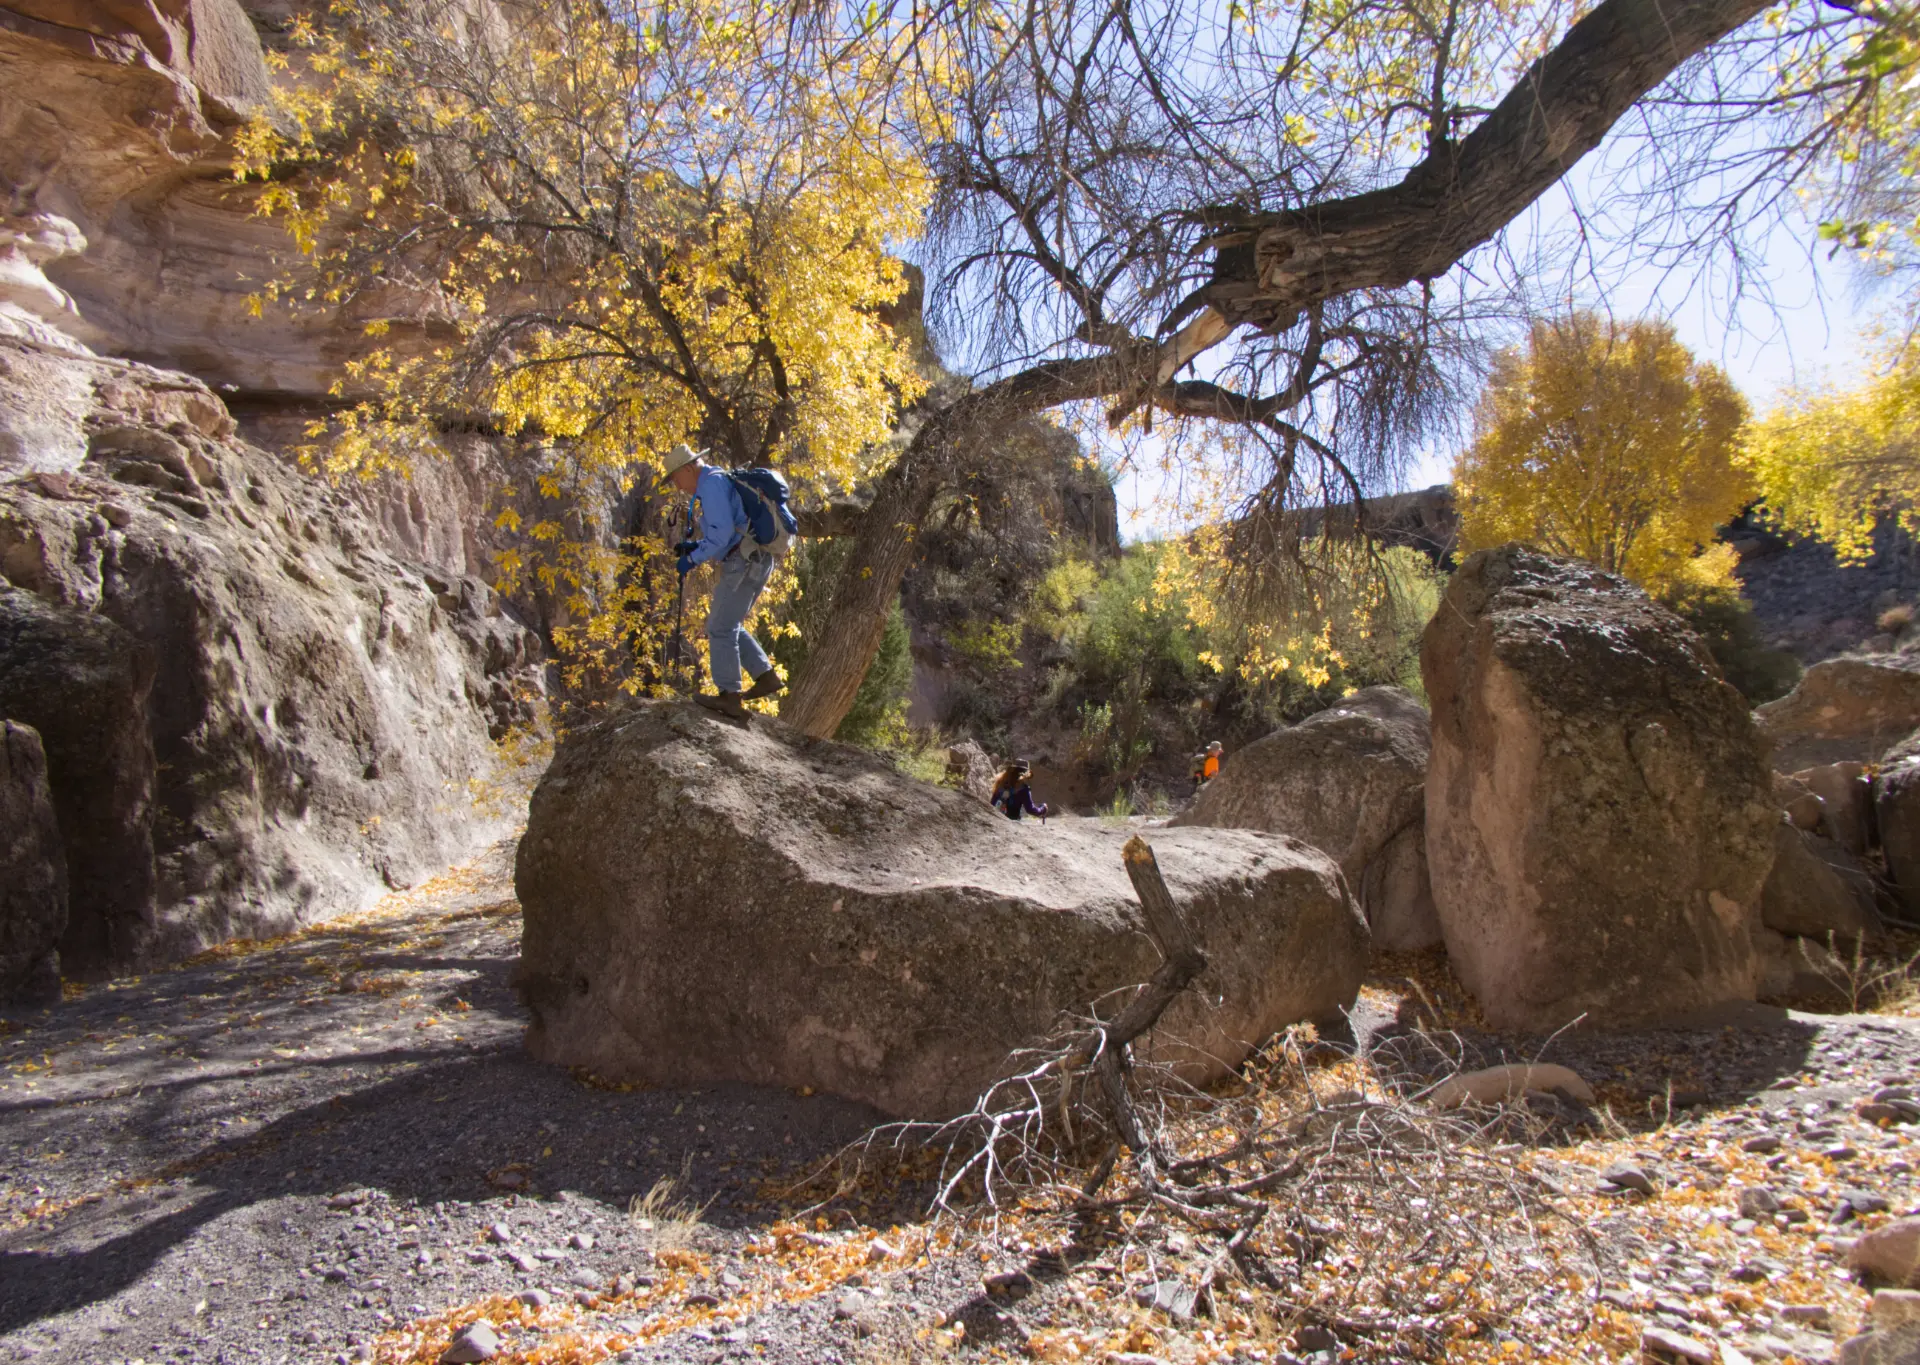 Dennis on a giant boulder in the canyon